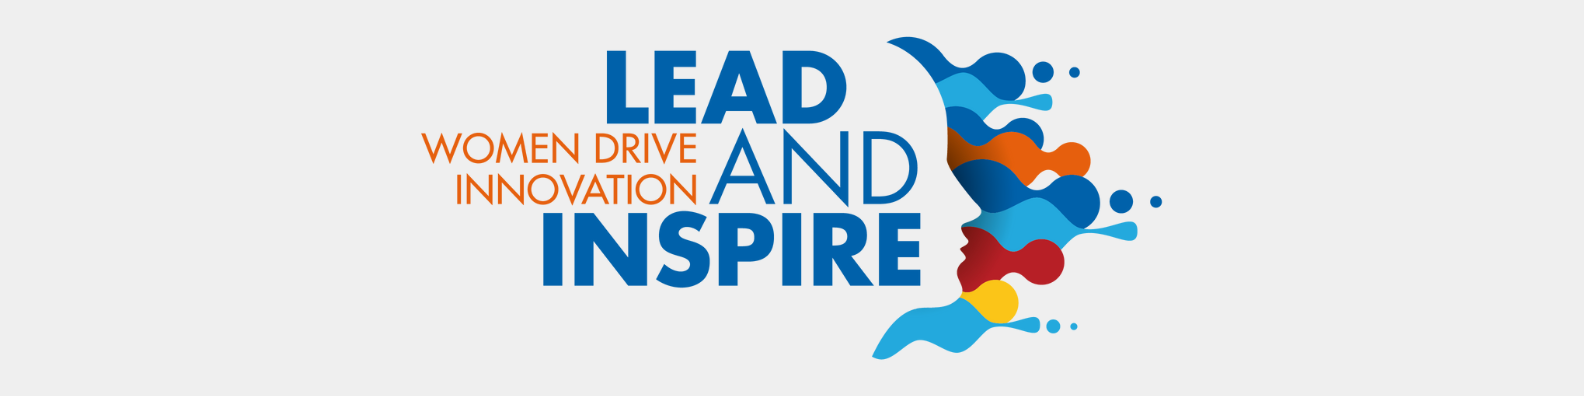 lead-and-inspire-banner-grau